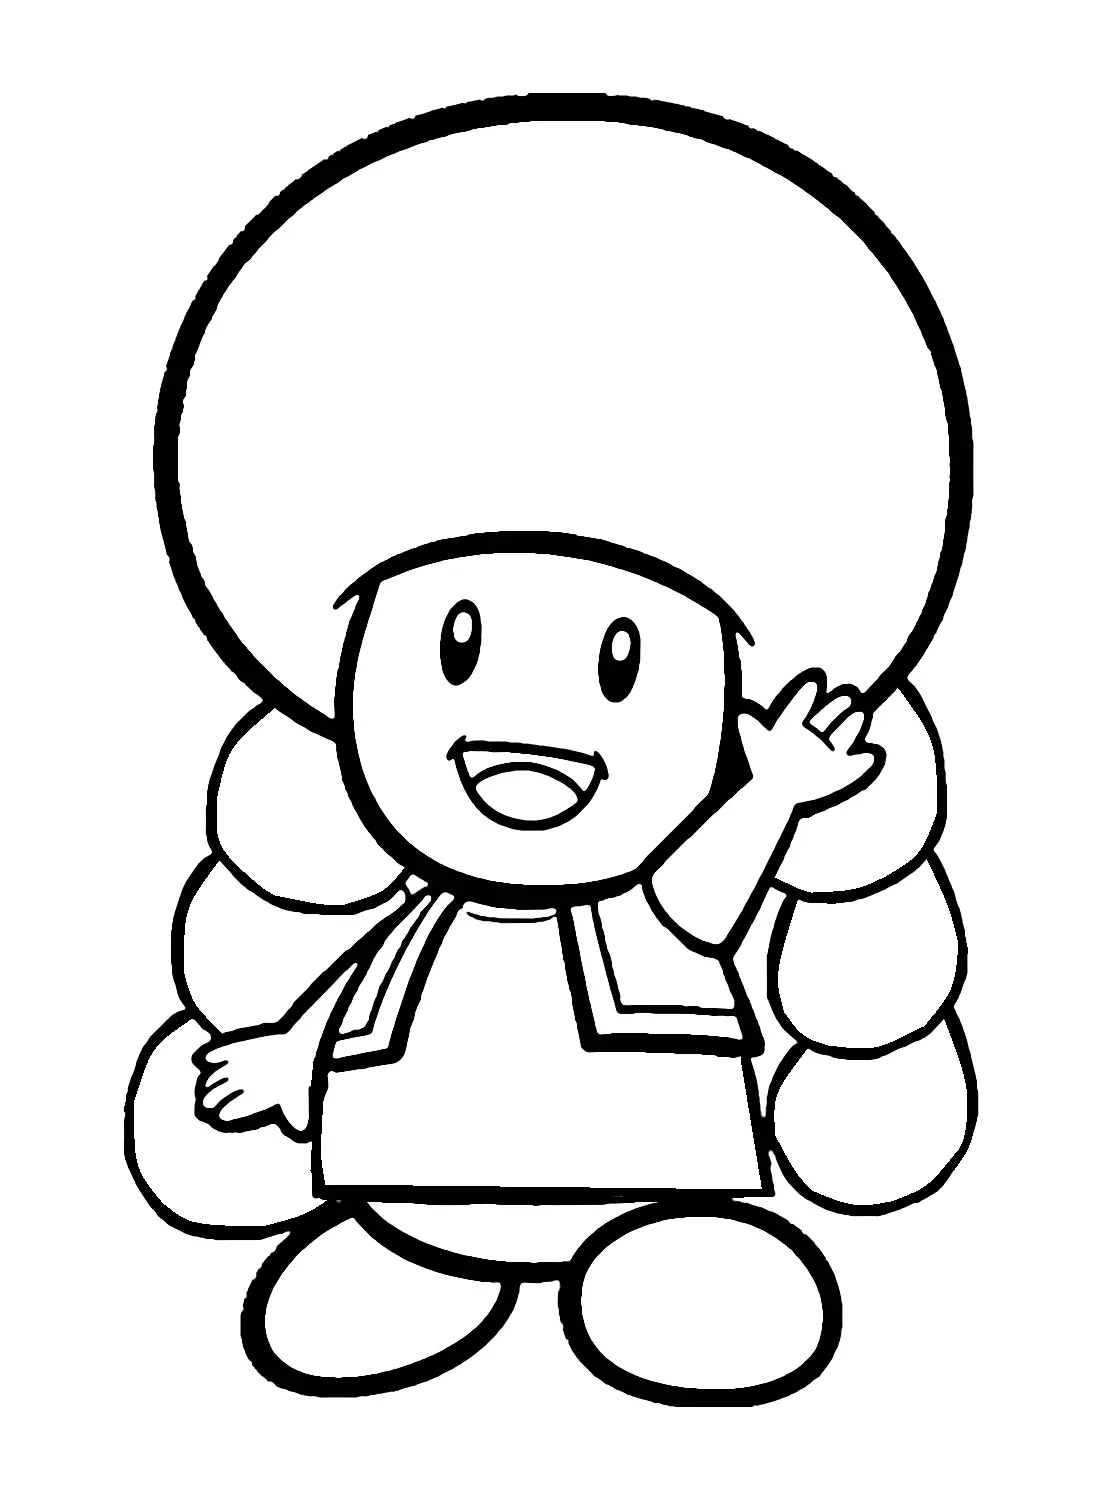 Toadette Coloring Pages